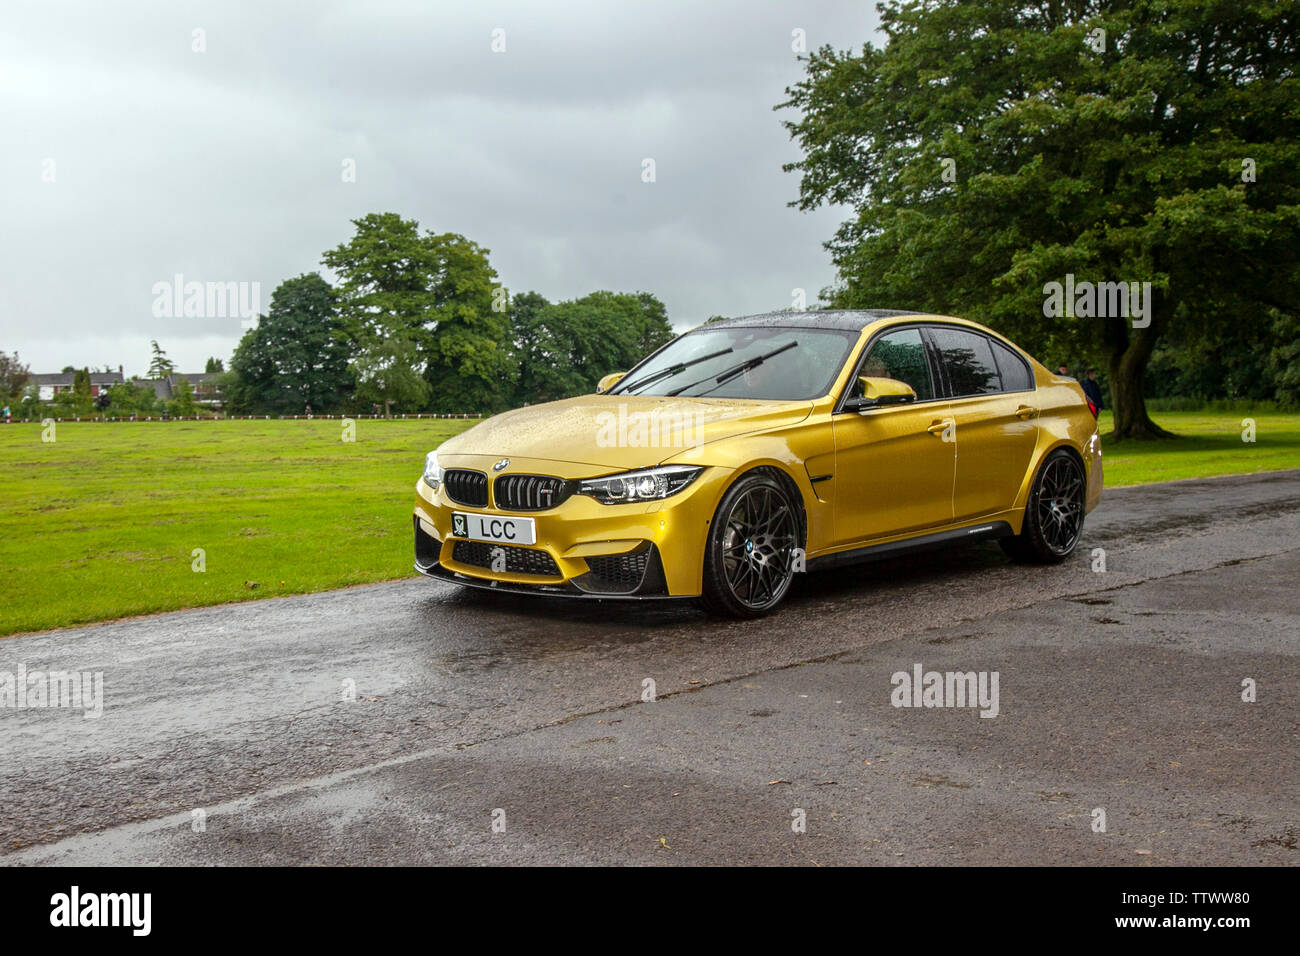 Bmw M4 Coupe High Resolution Stock Photography and Images - Alamy